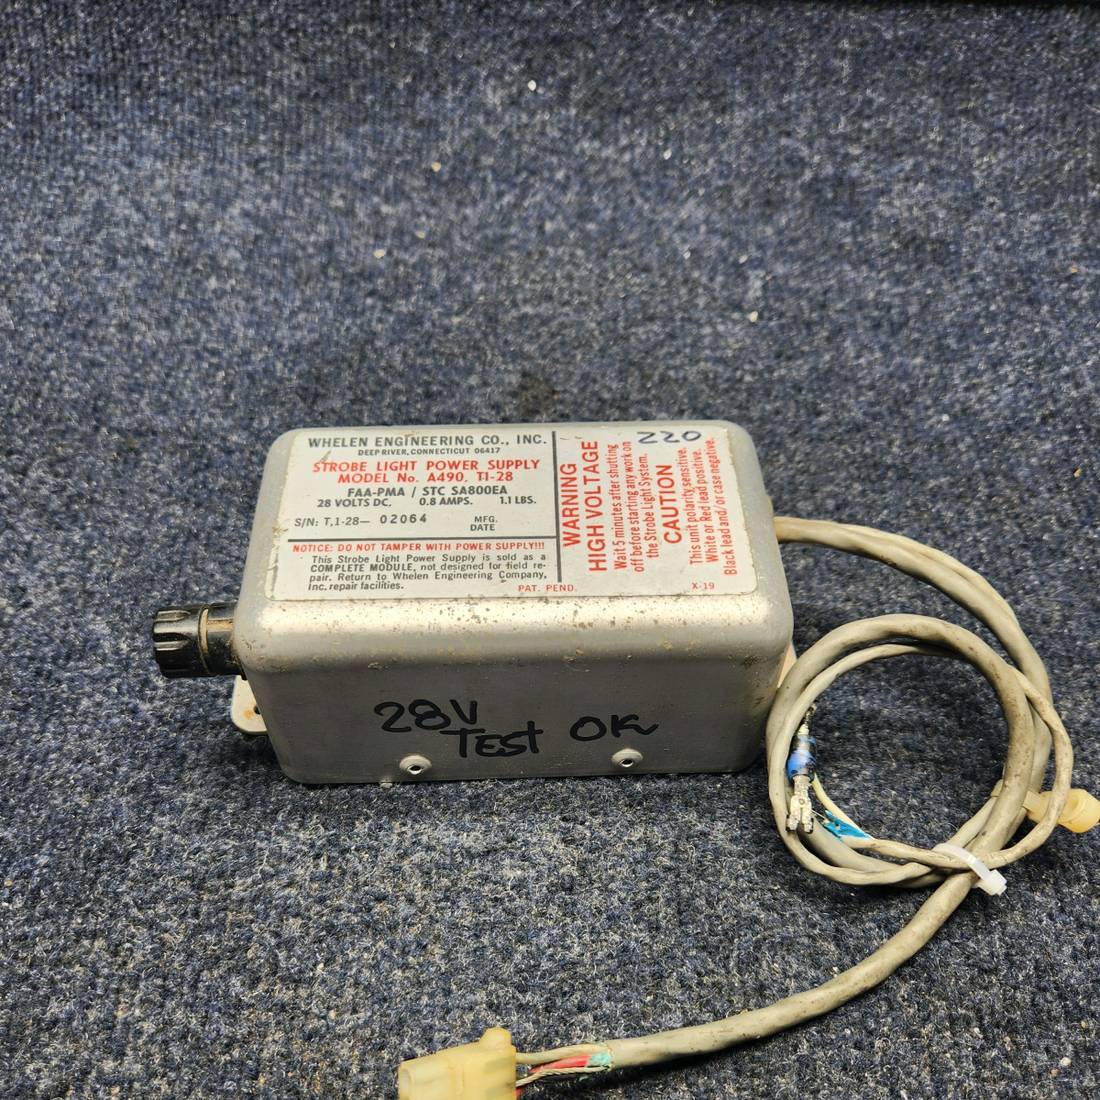 Used aircraft parts for sale, A490,T1-28 Whelen Strobe Power Supply WHELEN STROBE LIGHT POWER SUPPLY 28 VOLTS